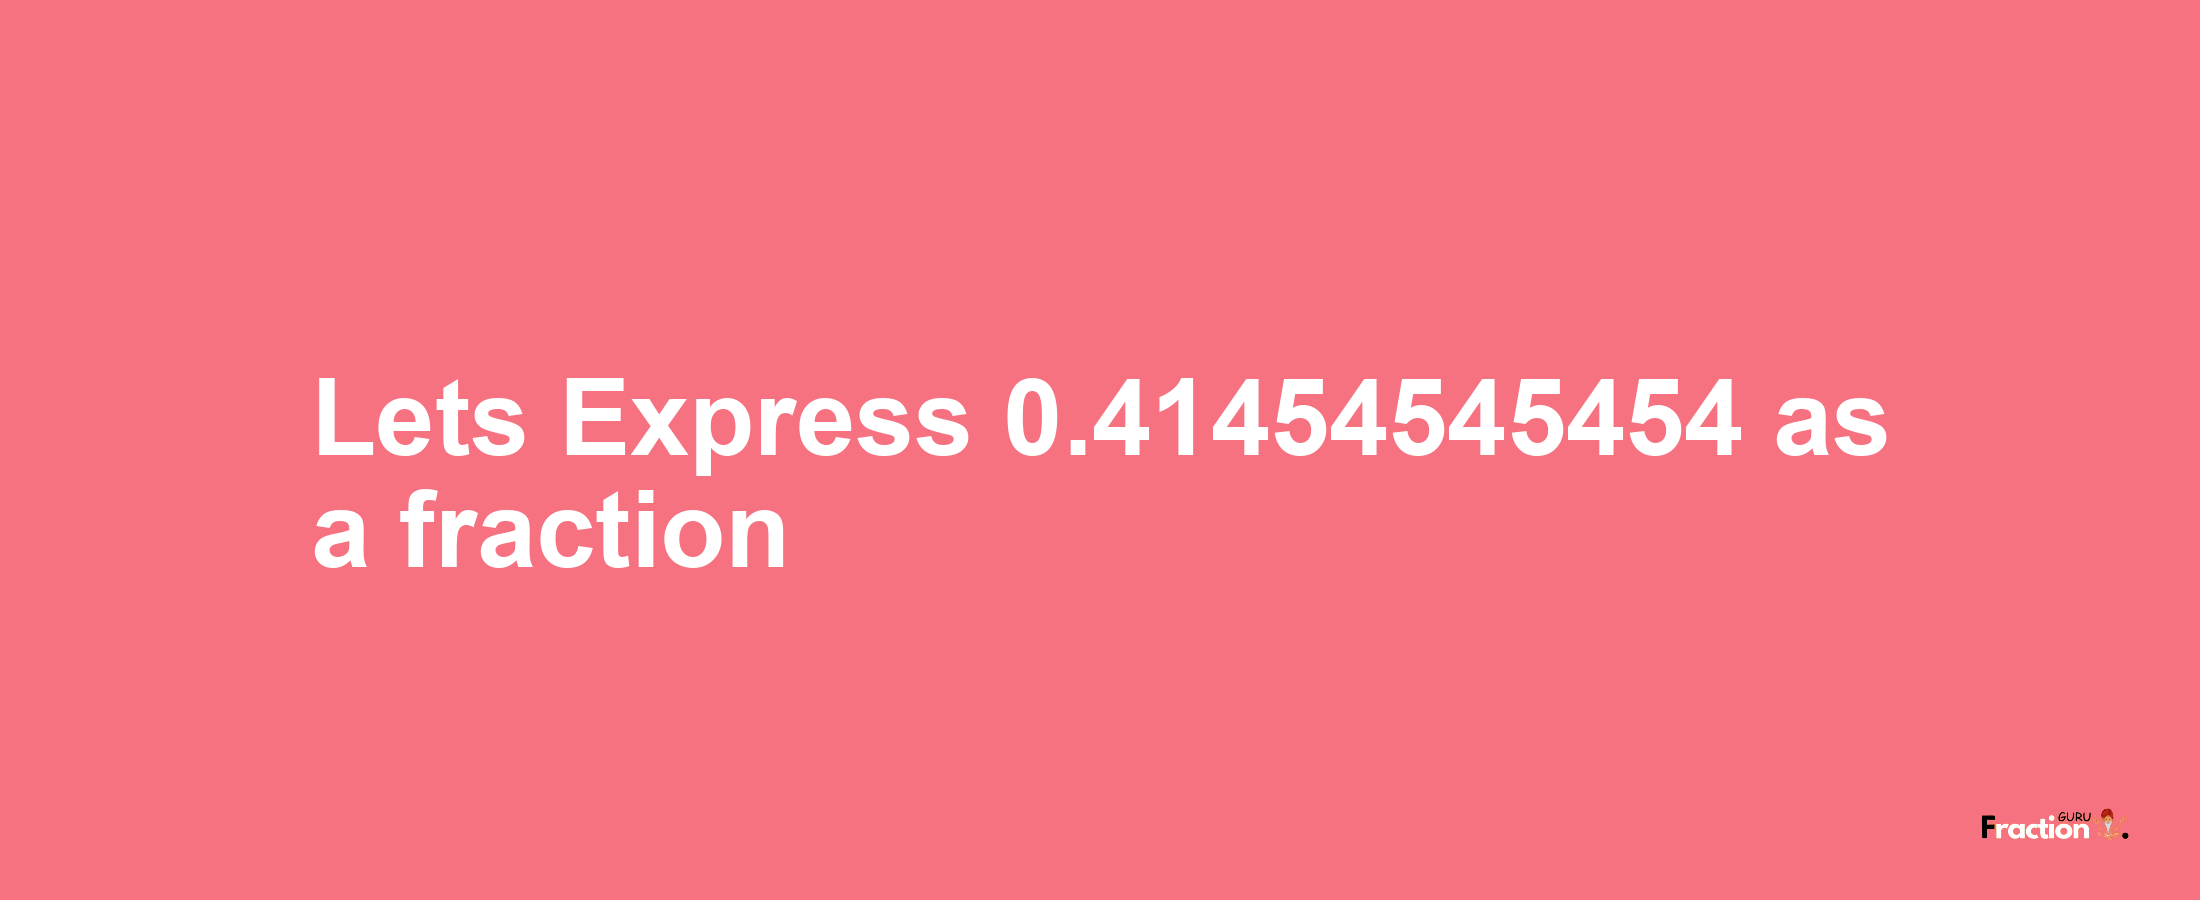 Lets Express 0.41454545454 as afraction